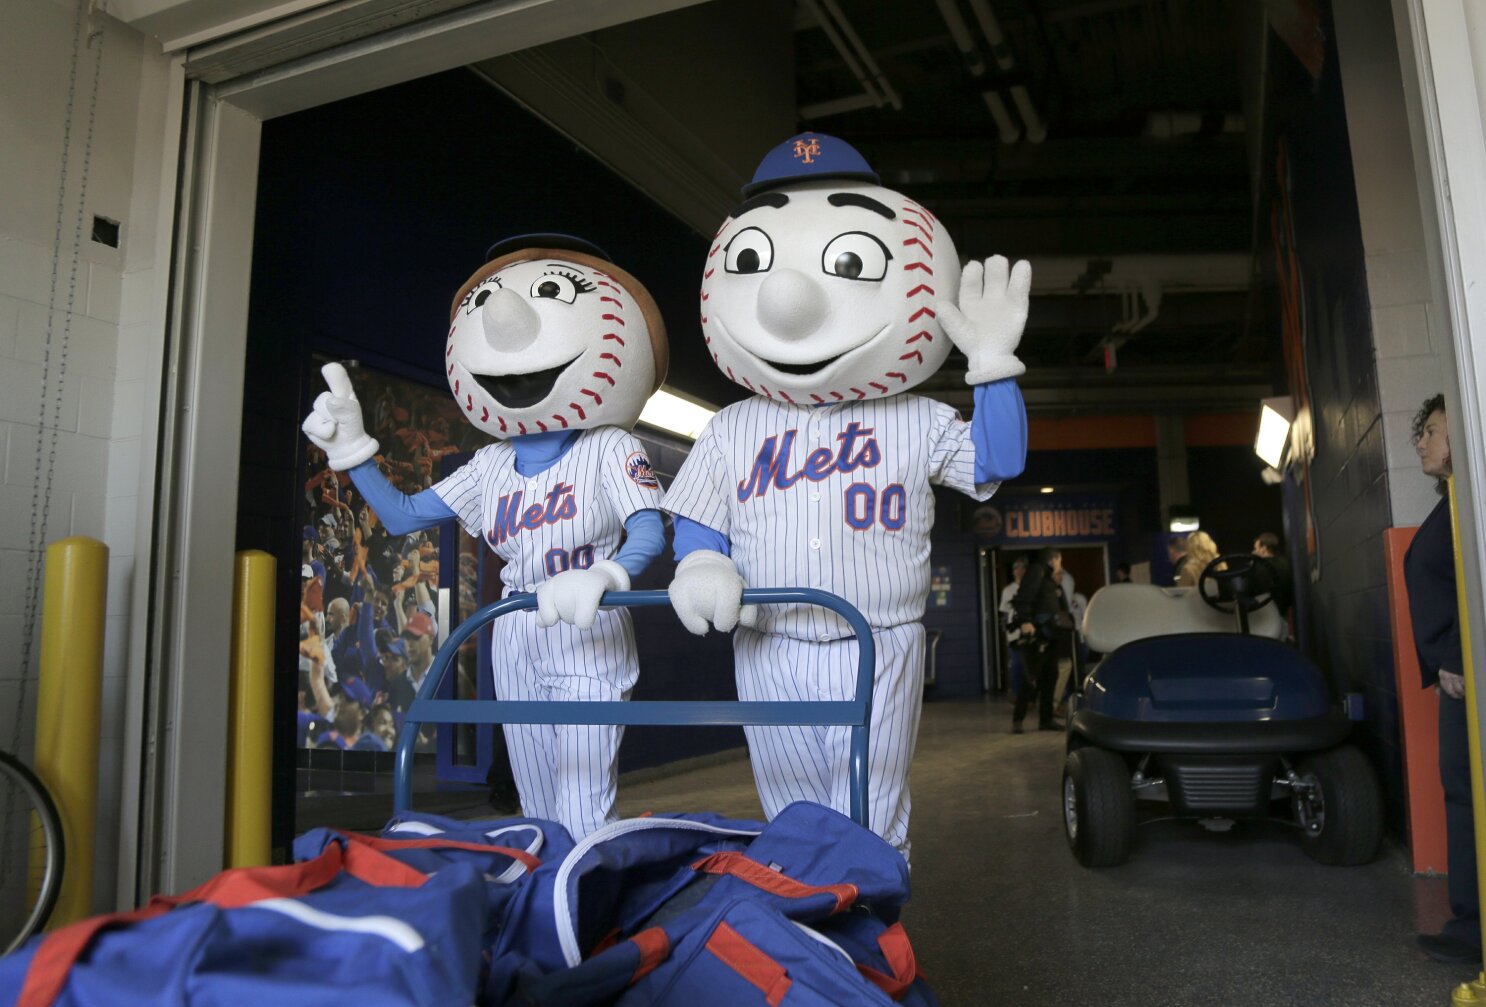 Phillie Phanatic, Mr Met, MLB mascots now permitted in parks